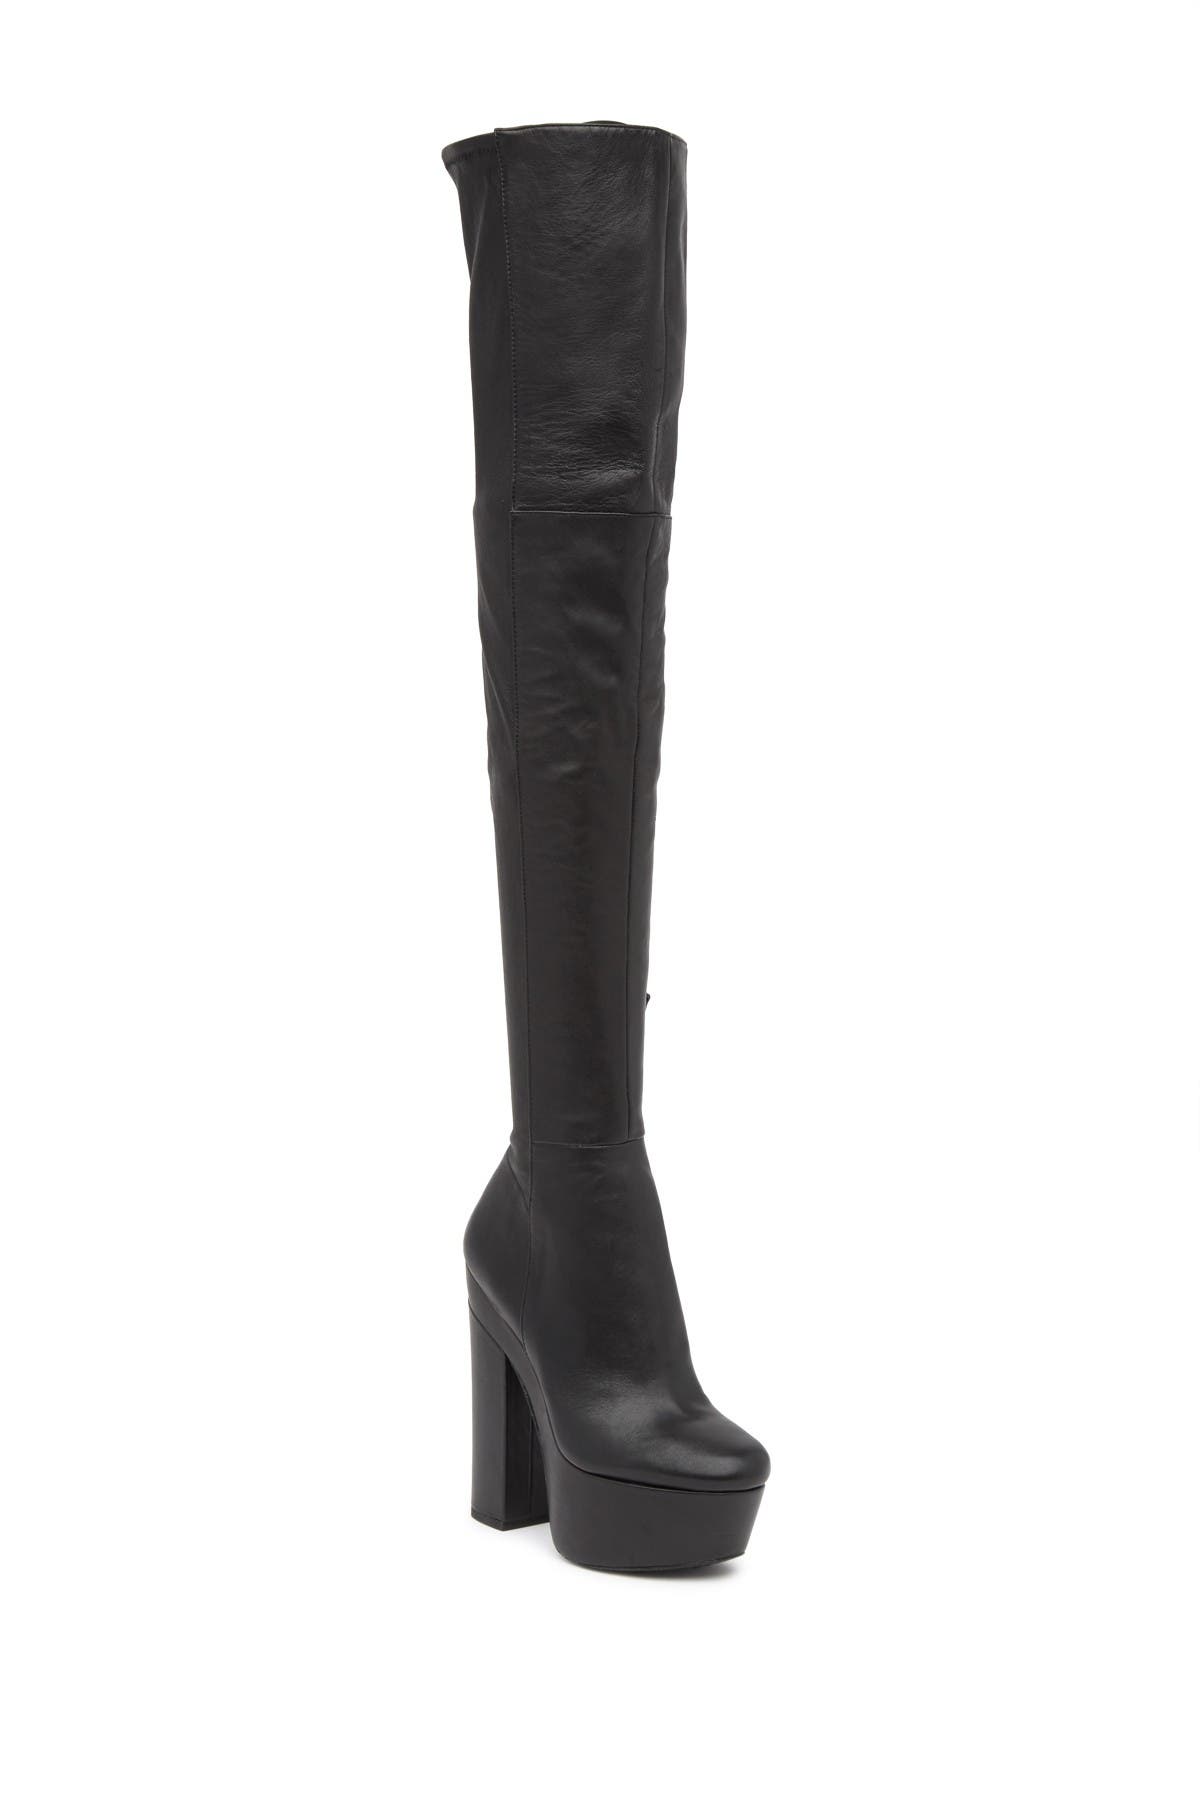 thigh high boots nordstrom rack